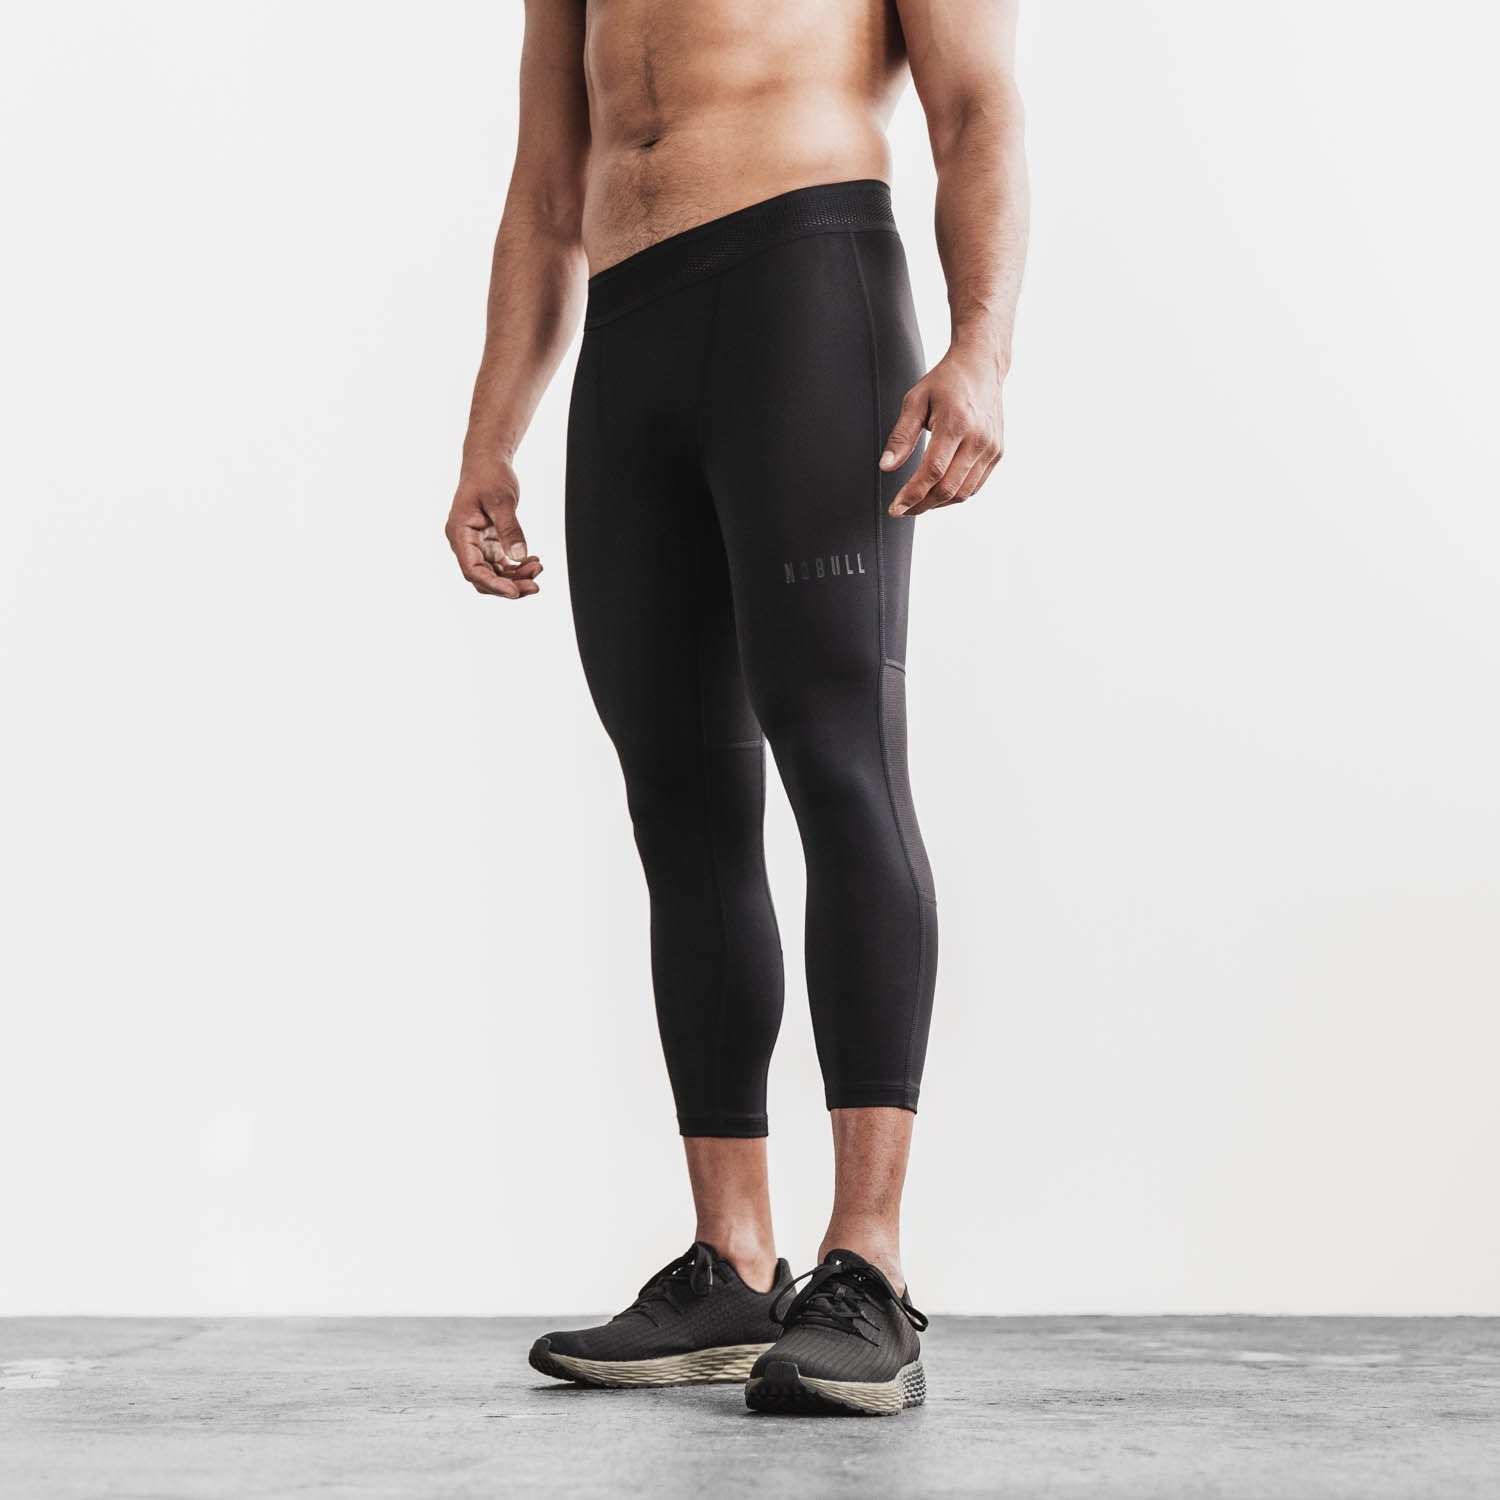 MEN'S MIDWEIGHT COMPRESSION TIGHT 23